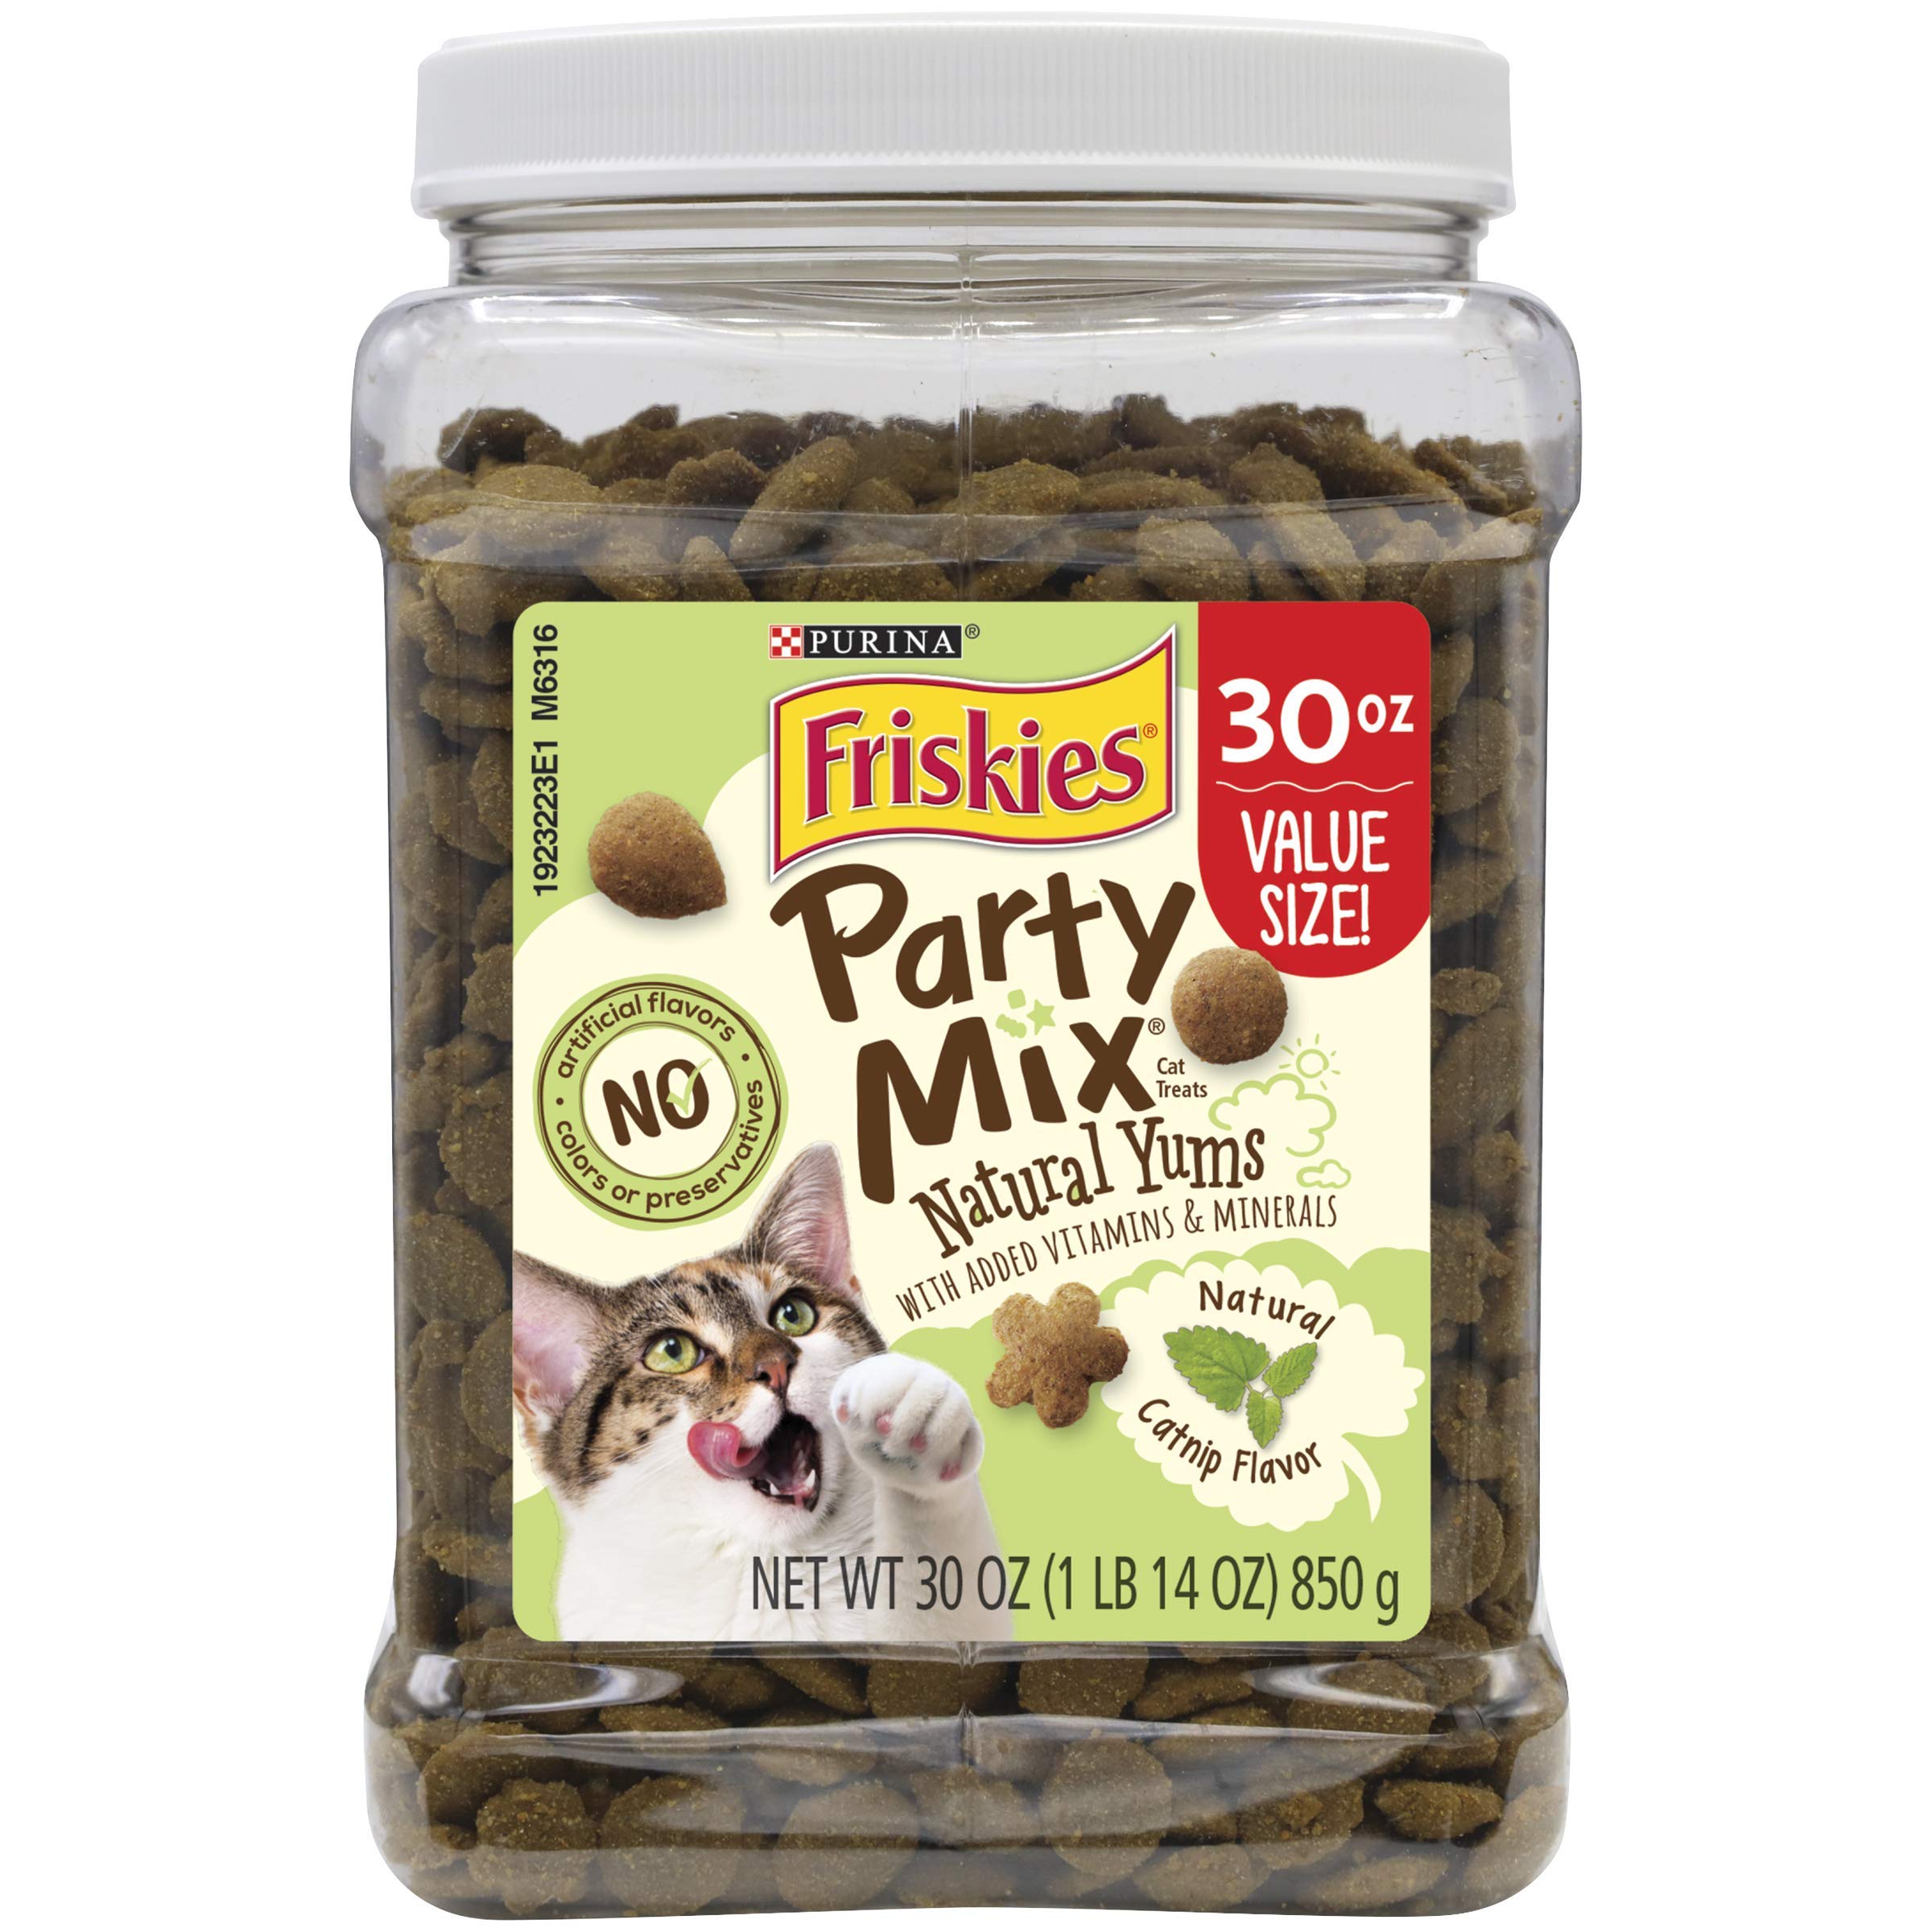 Friskies Purina Friskies Made in USA Facilities, Natural Cat Treats, Party Mix Natural Yums Catnip Flavor - 30 oz. Canister